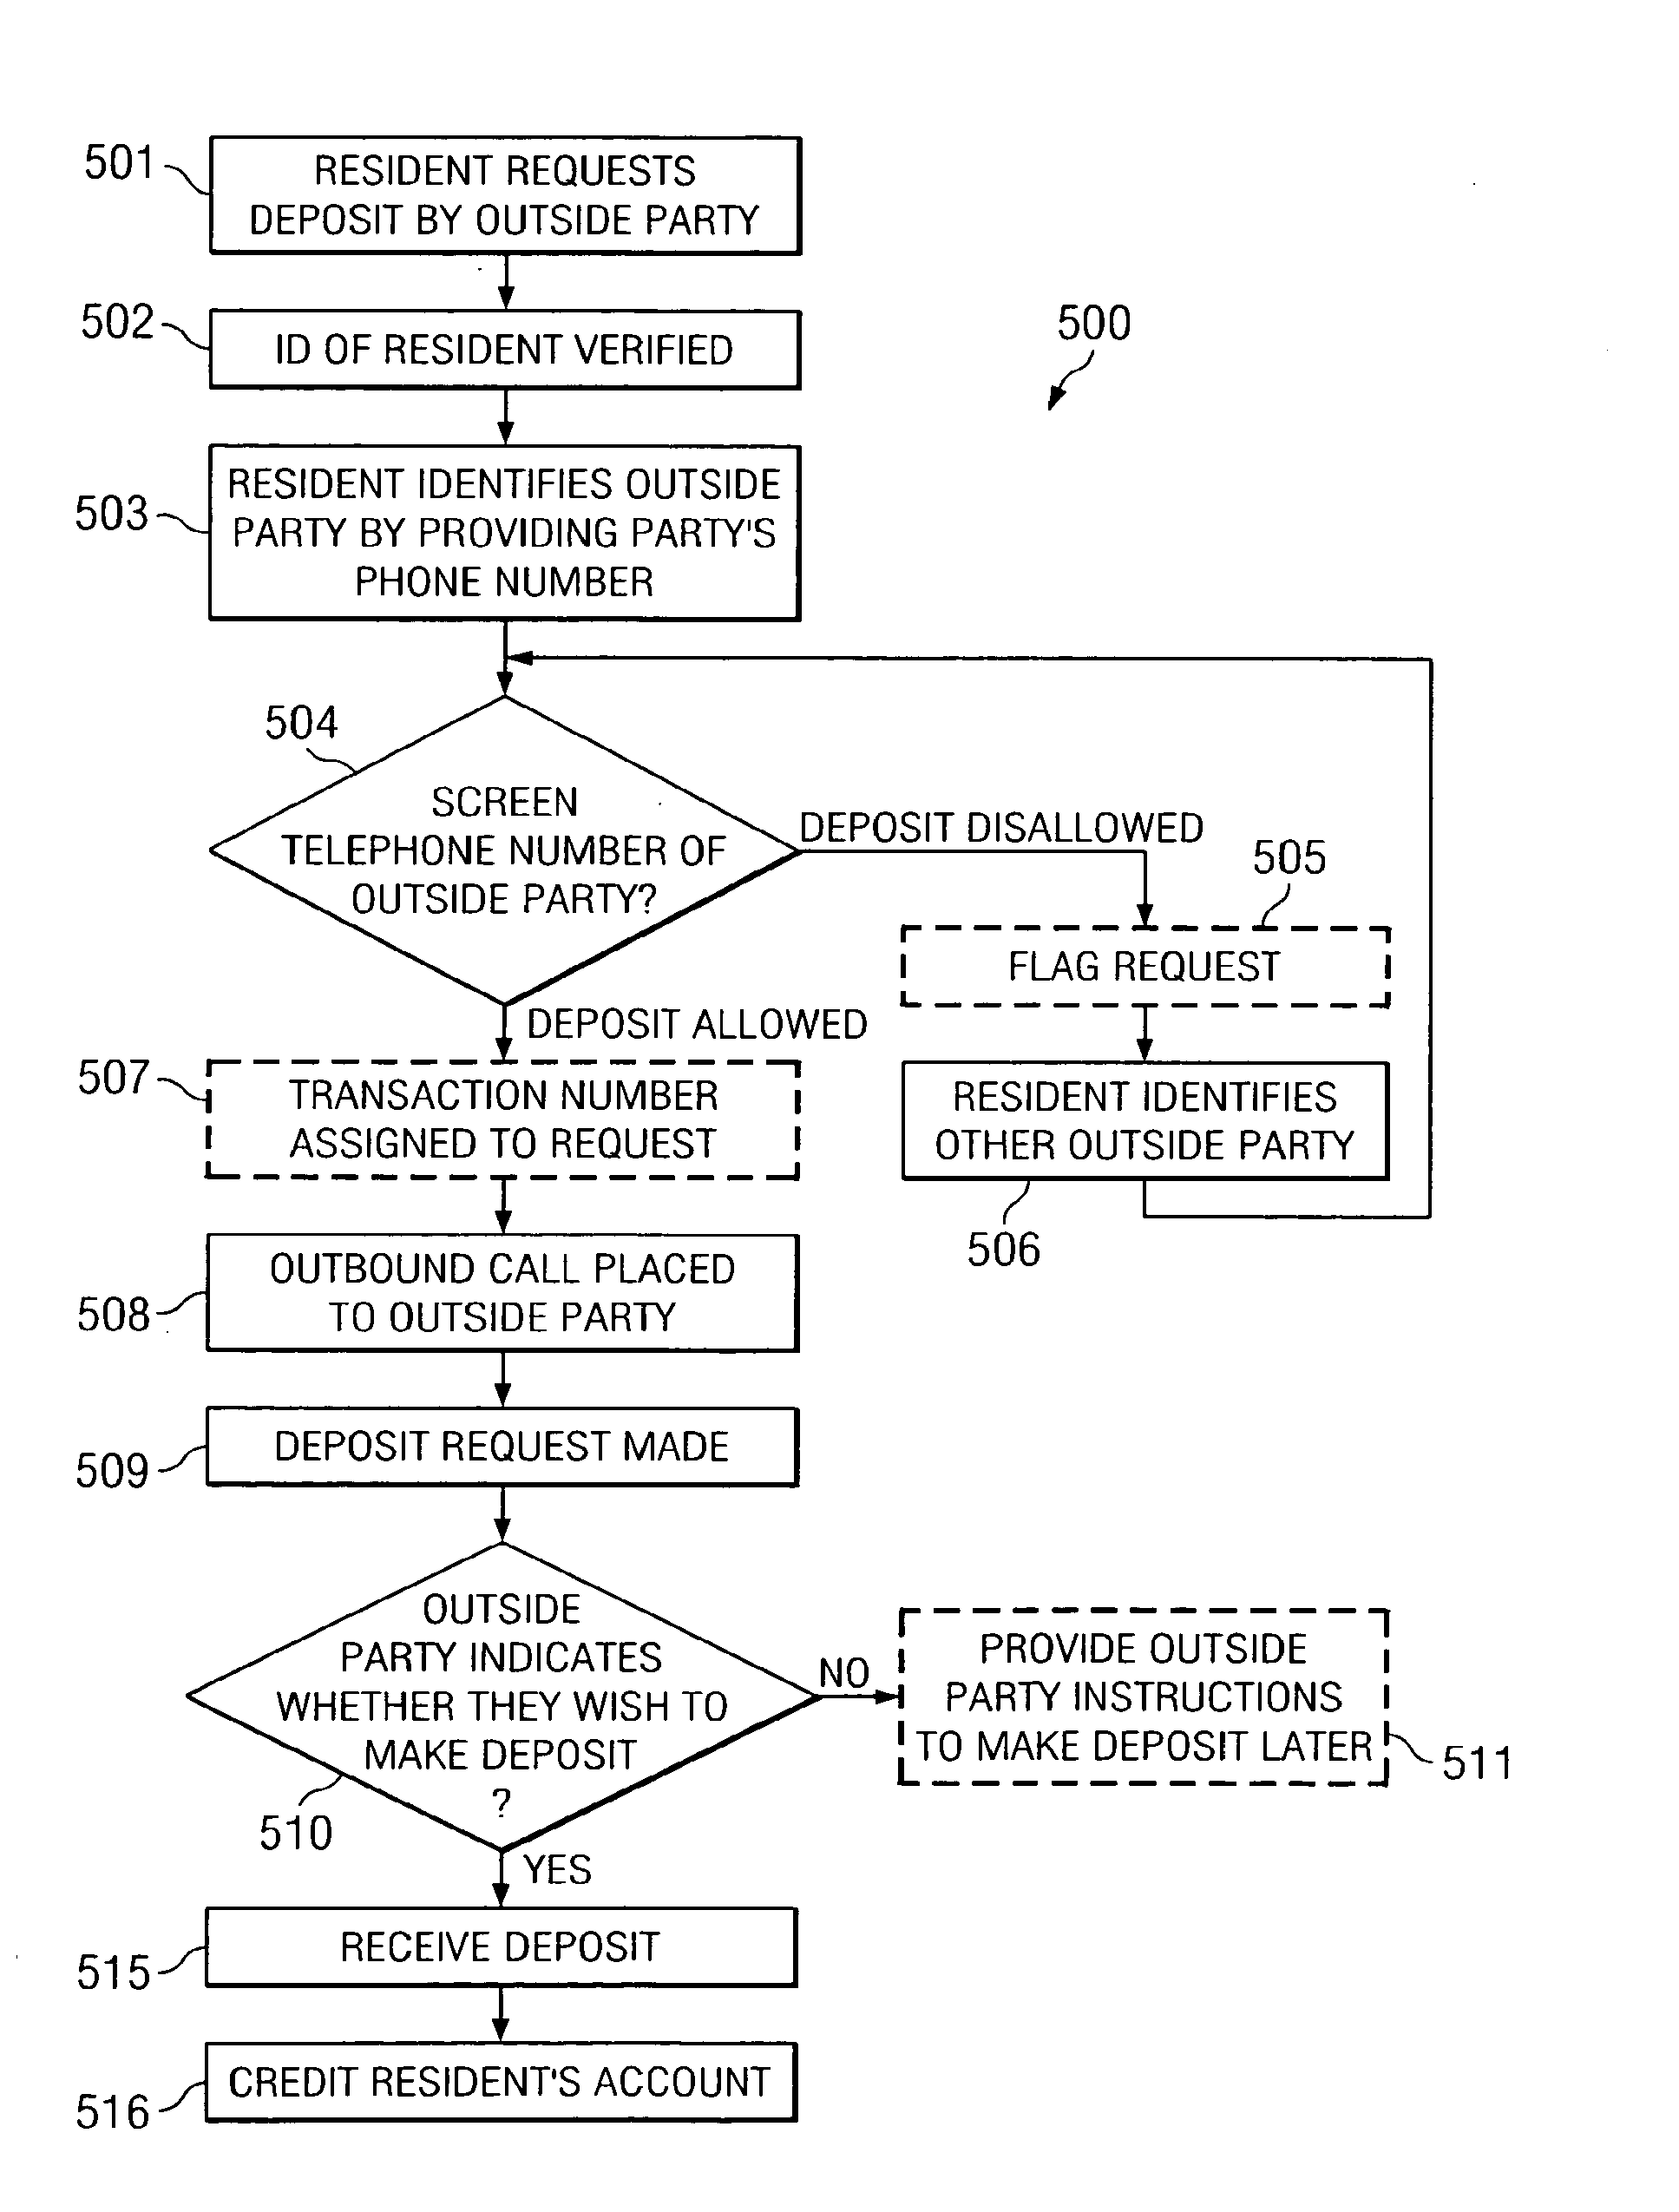 Systems and Methods for Transaction and Information Management